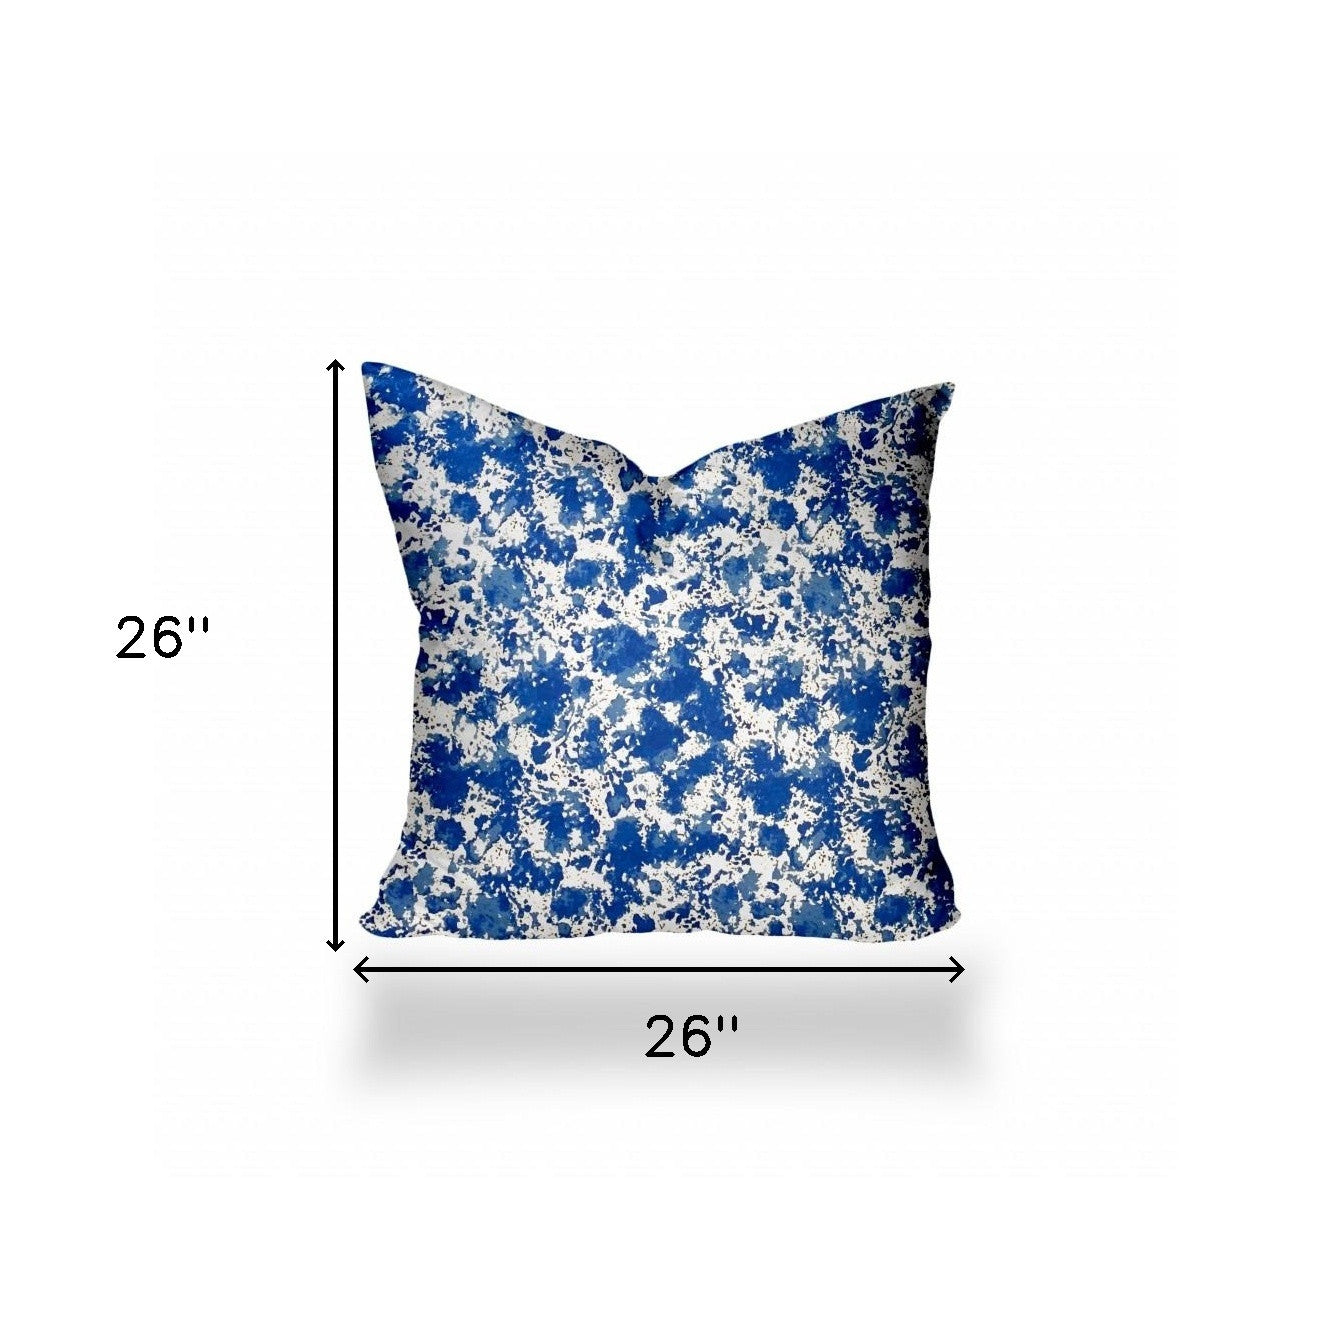 26" X 26" Blue And White Enveloped Coastal Throw Indoor Outdoor Pillow Cover